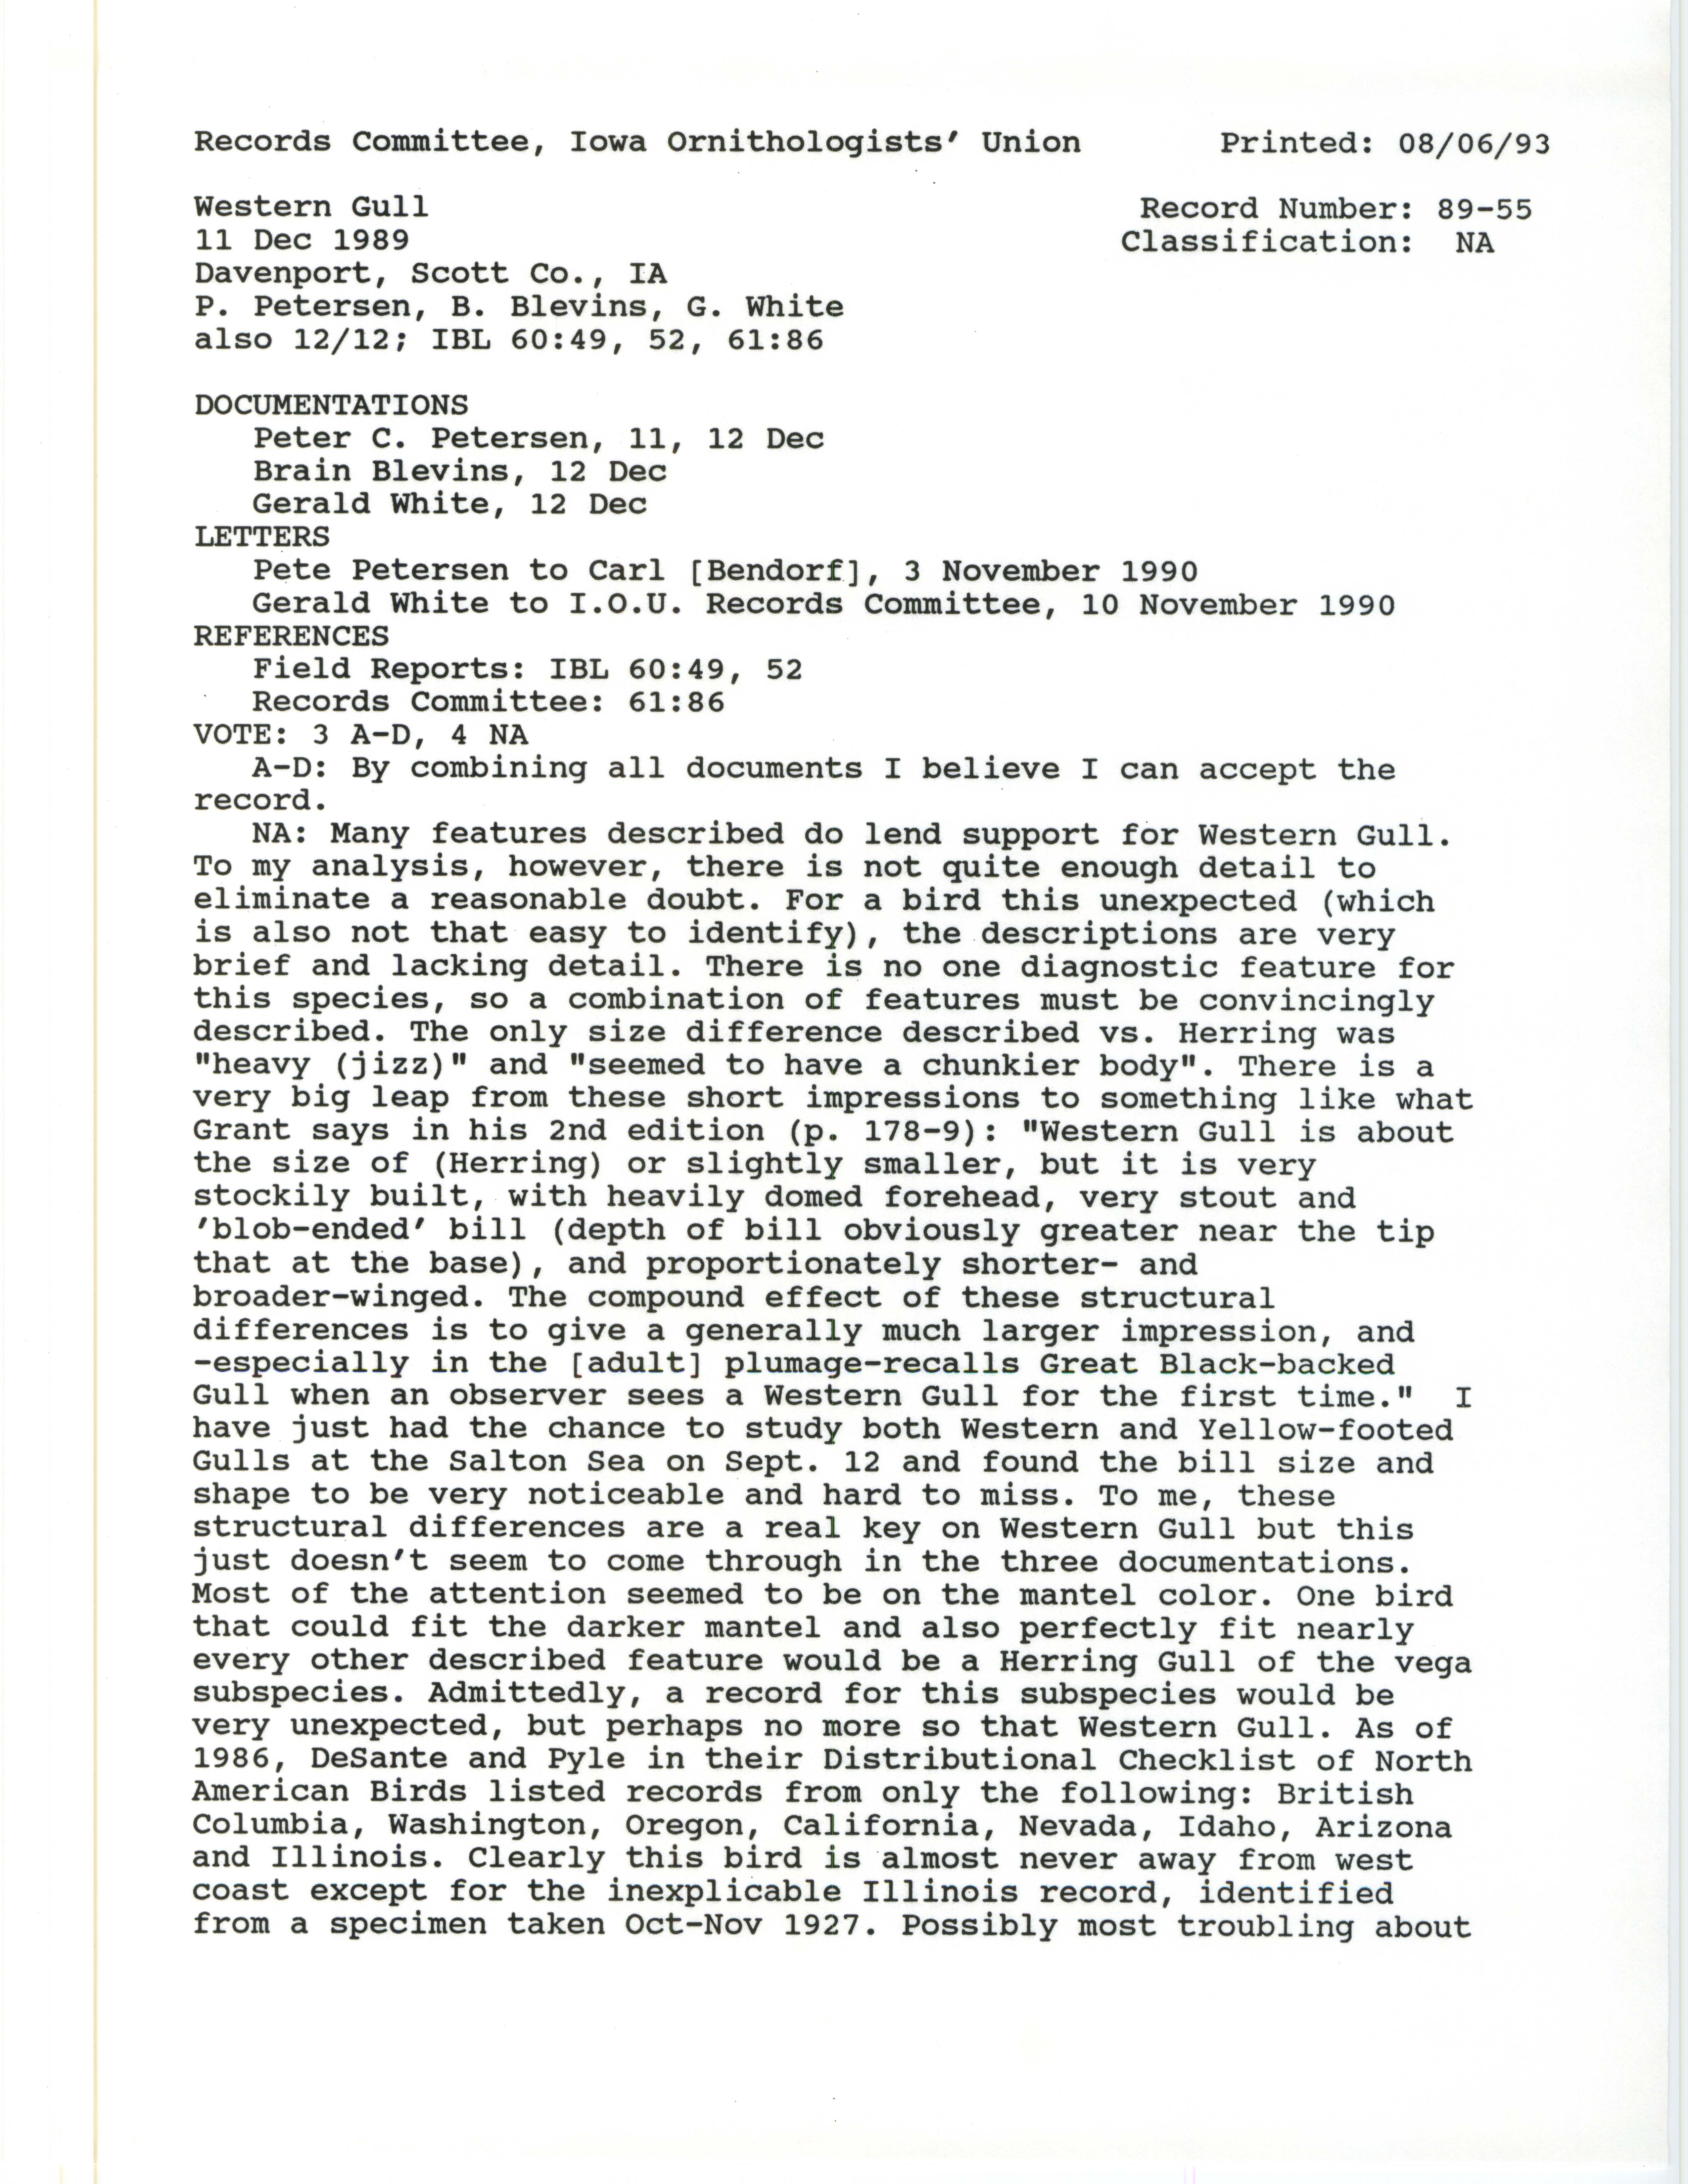 Records Committee review for rare bird sighting of Western Gull east of Lock and Dam 15 near Davenport, 1989